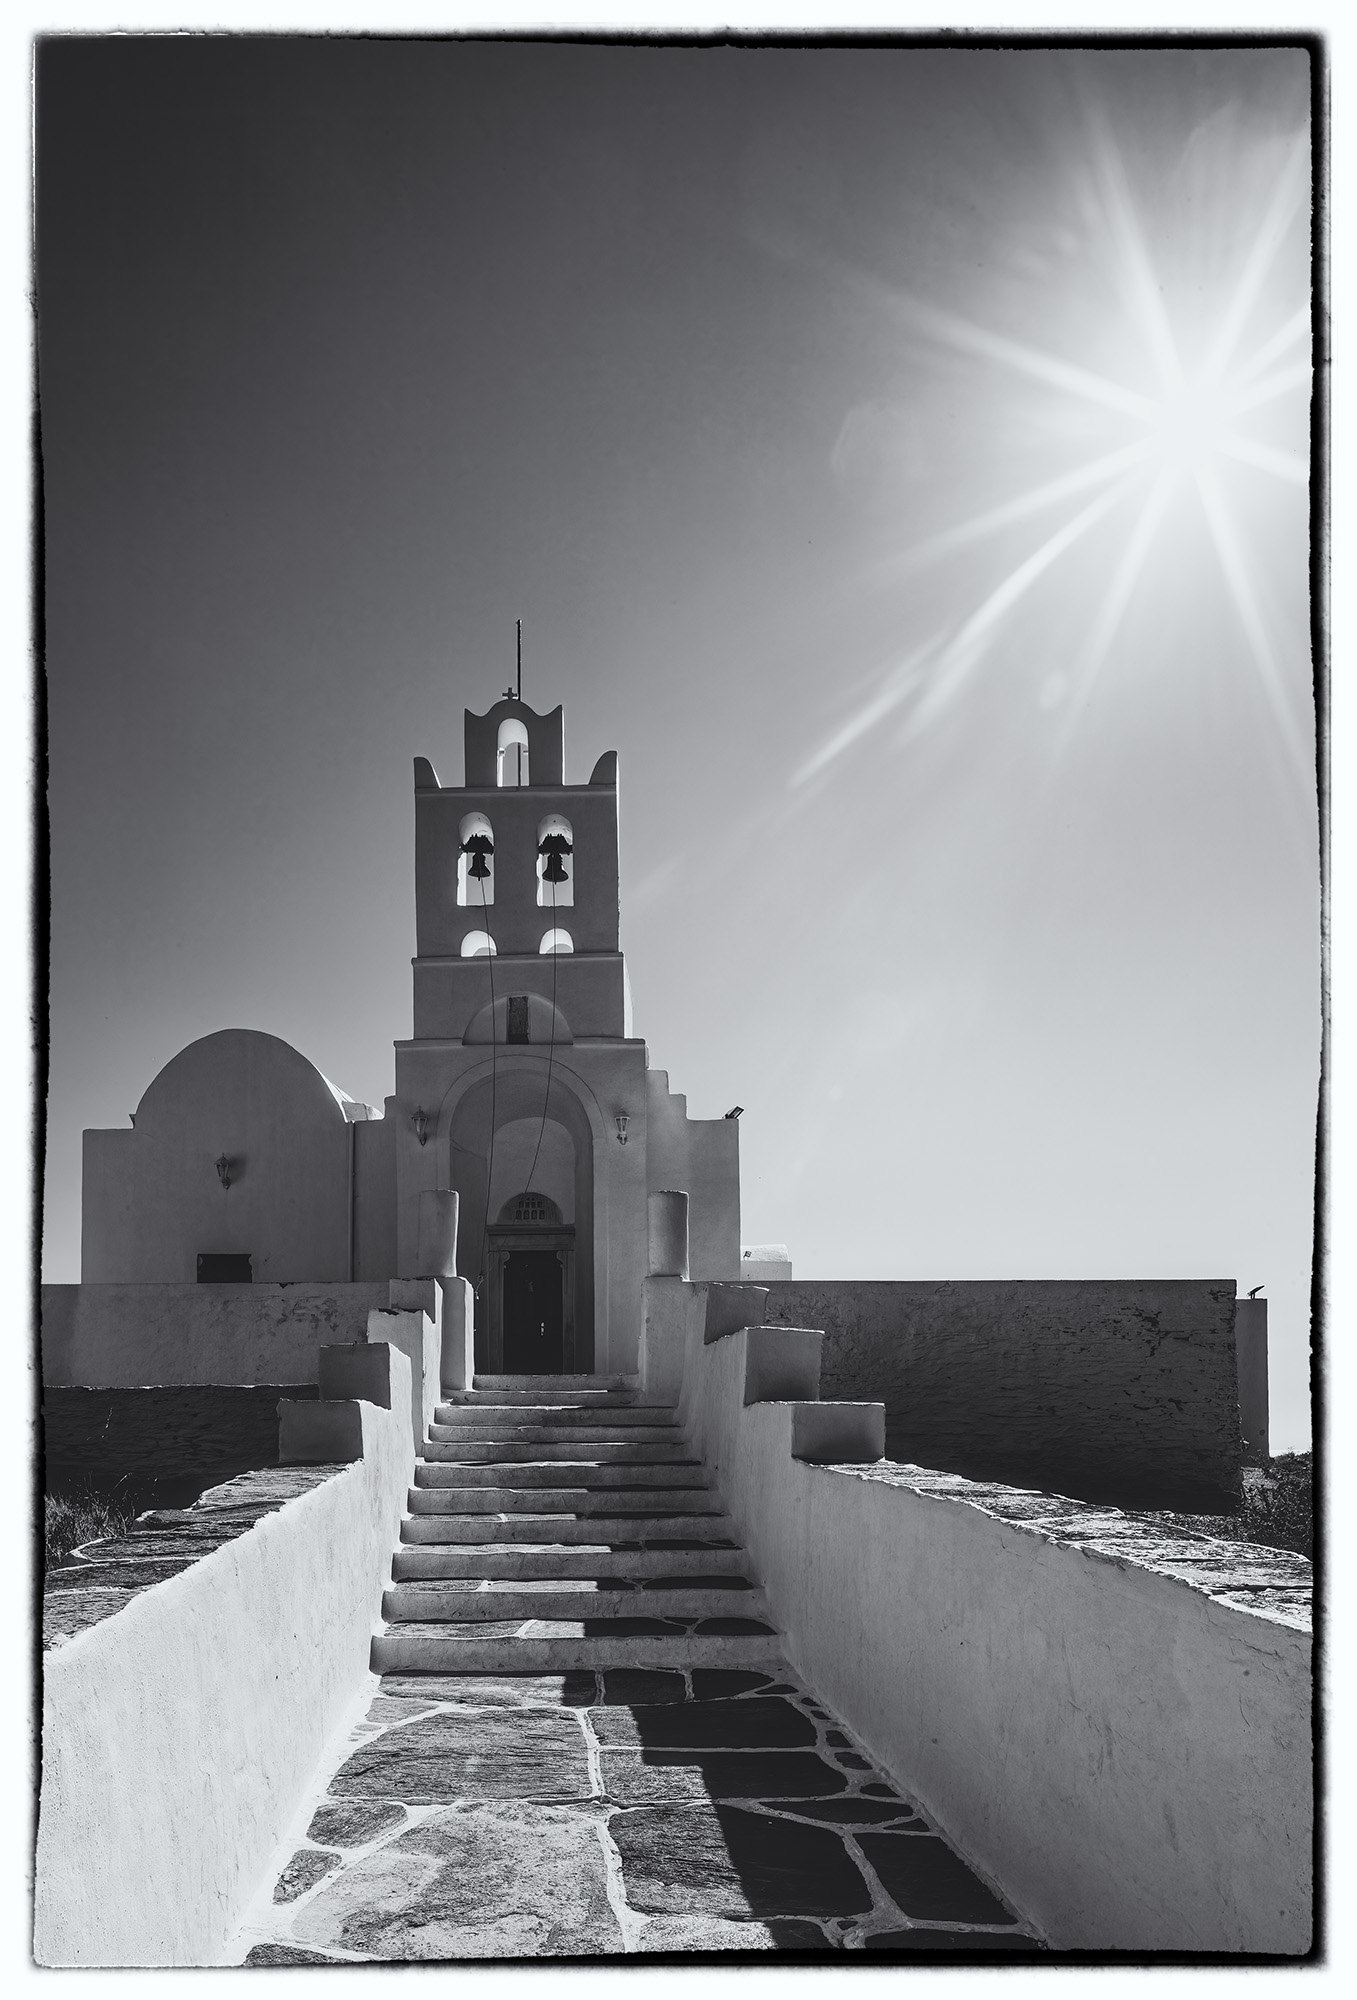 During our visit to Chrysopigi Monastery on the serene island of Sifnos, Greece, Veronica and I discovered a blissful solitude...